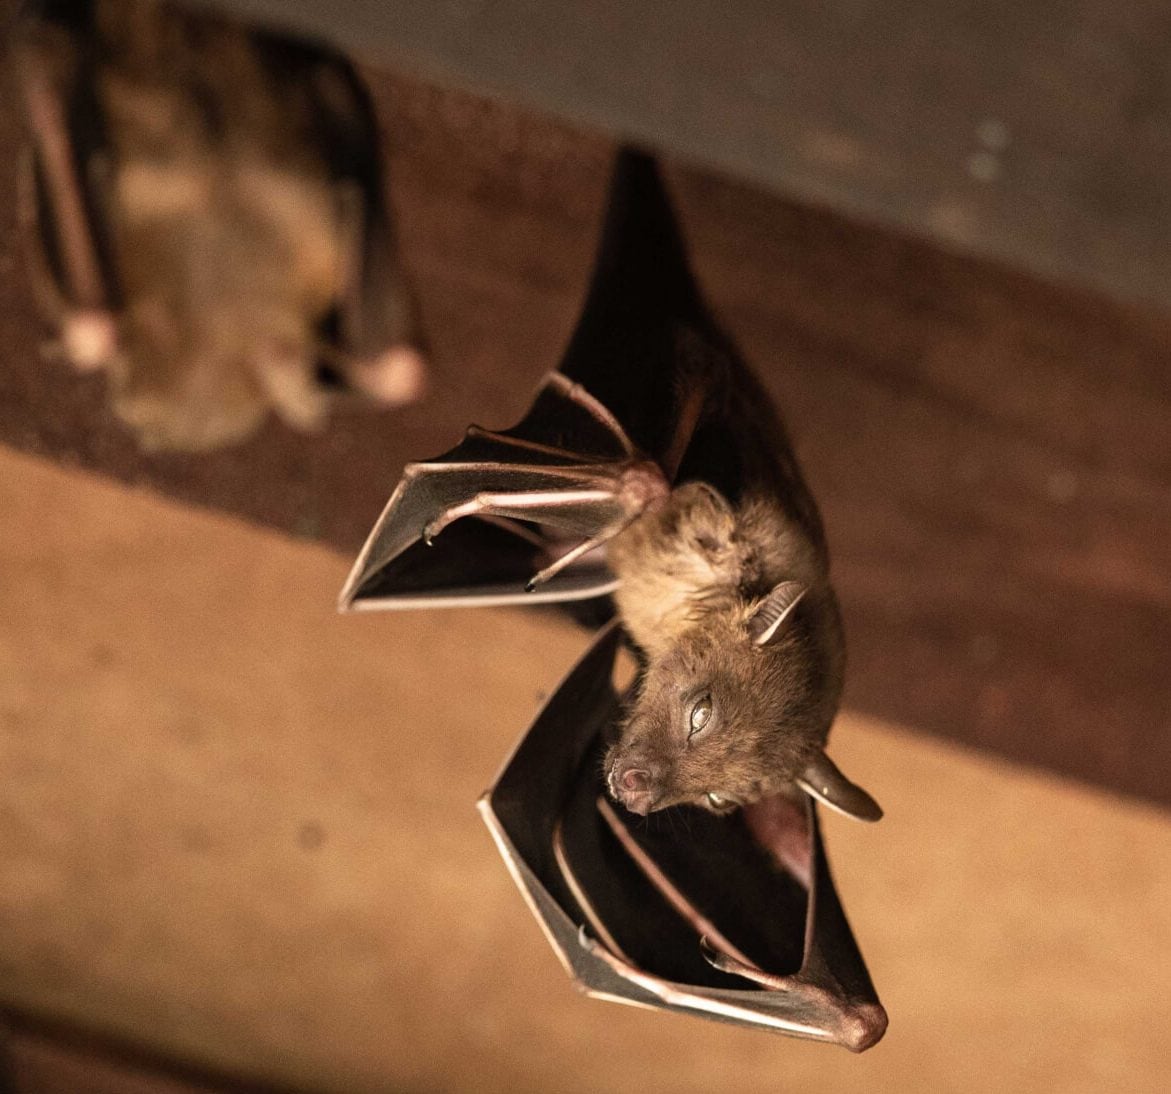 Bat removal services from wildlife removal experts in Nassau County, New York